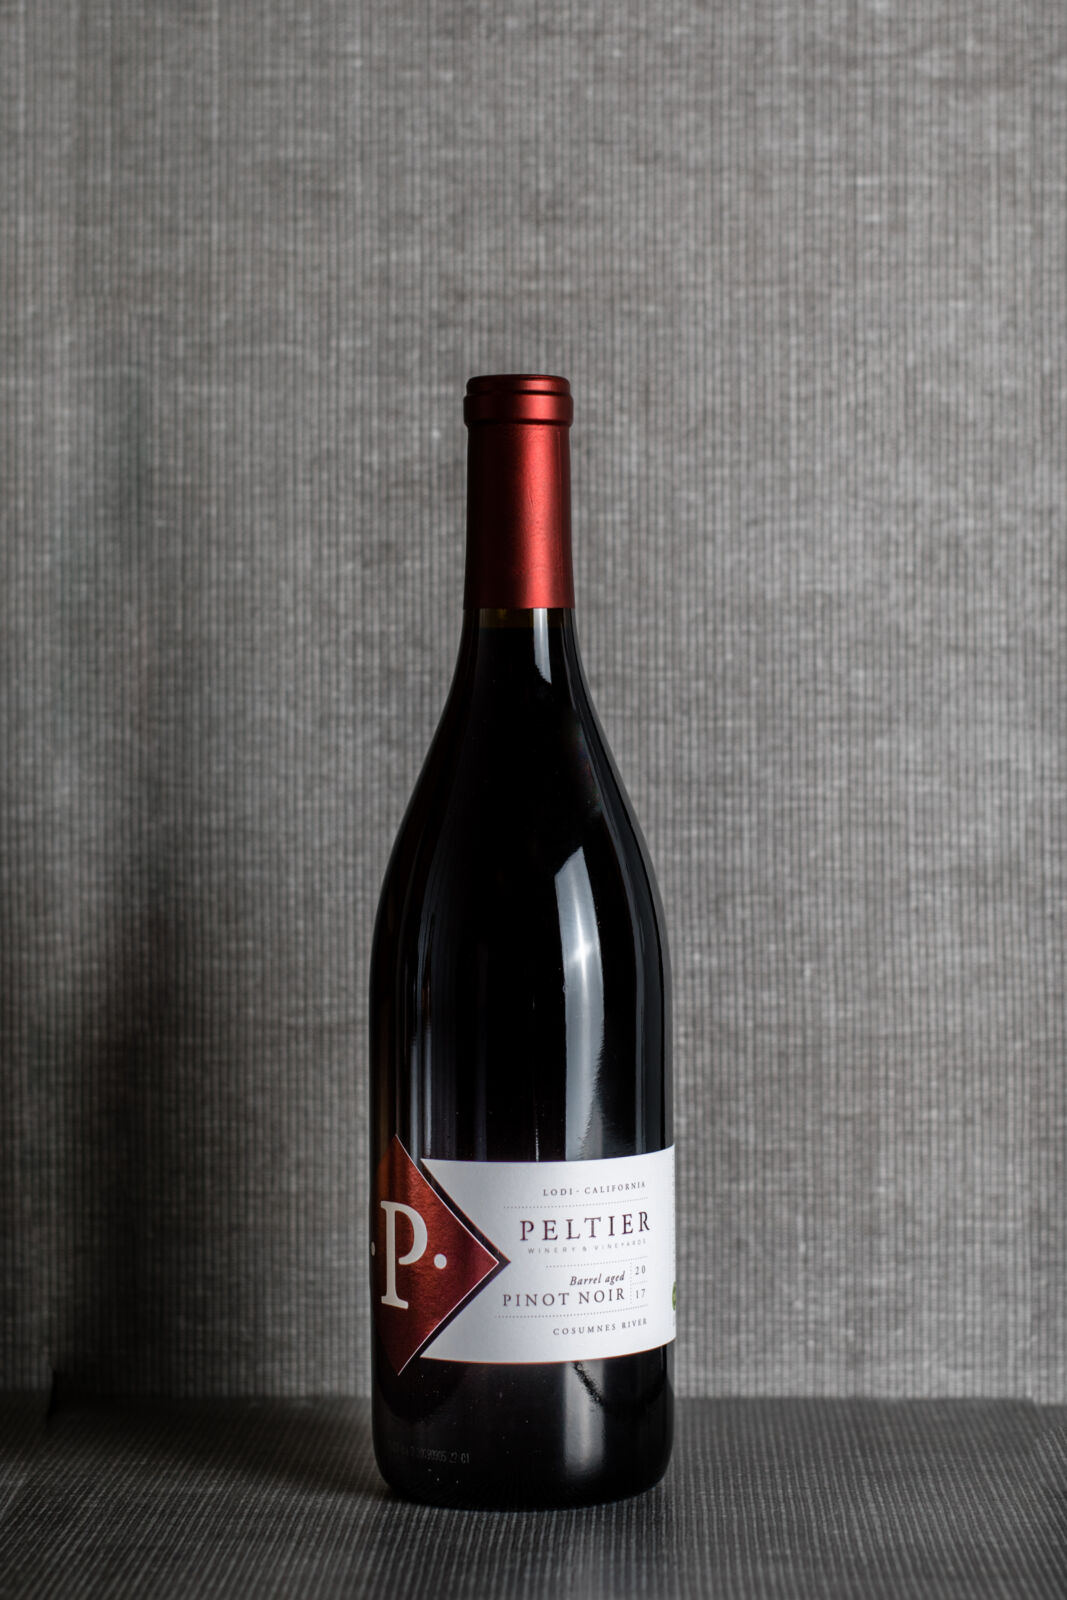 Pinot Noir bottle on grey background with black text over image Pinot Noir Diamond